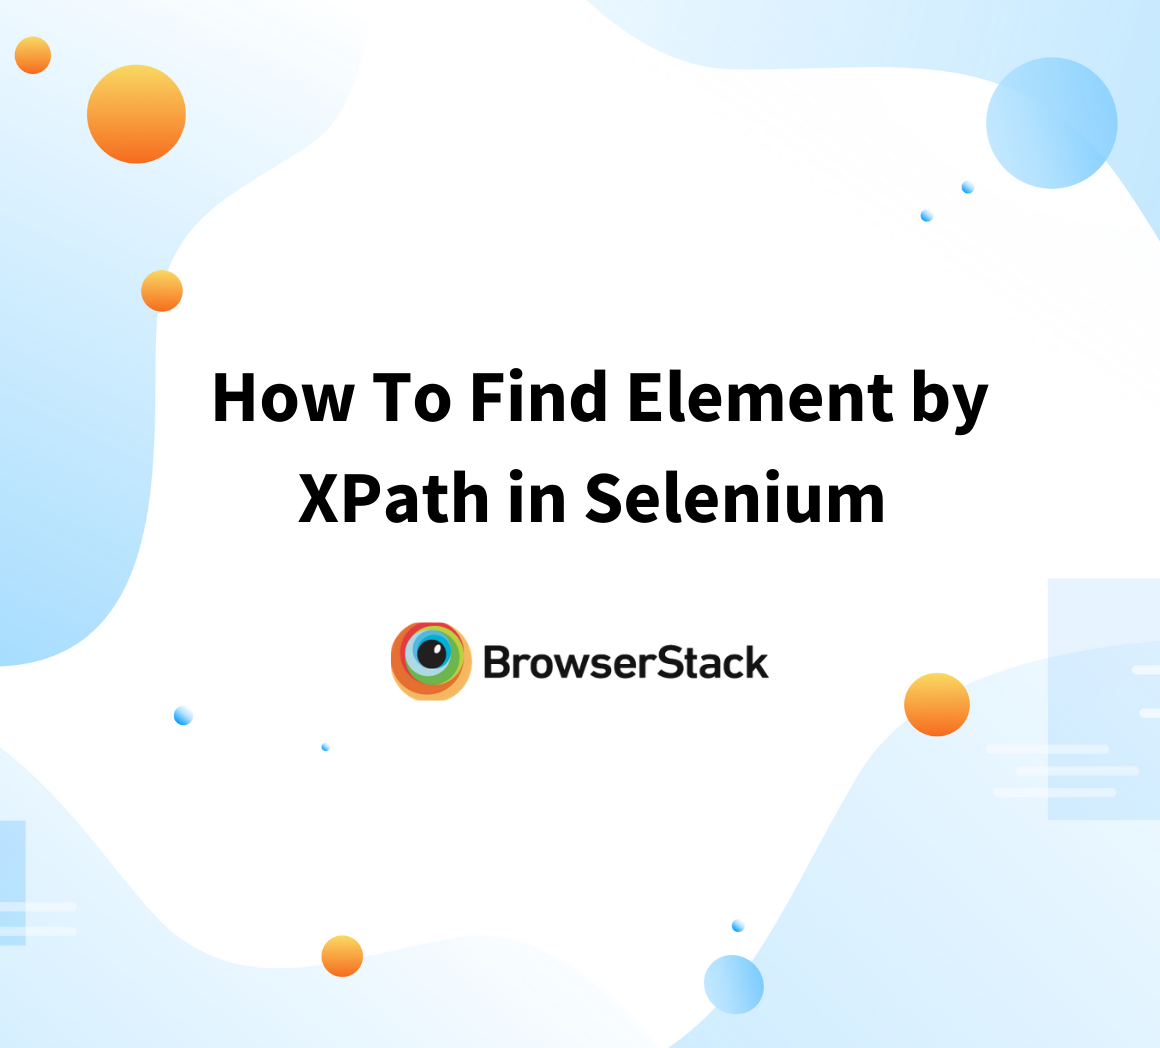 How to find element by XPath in Selenium